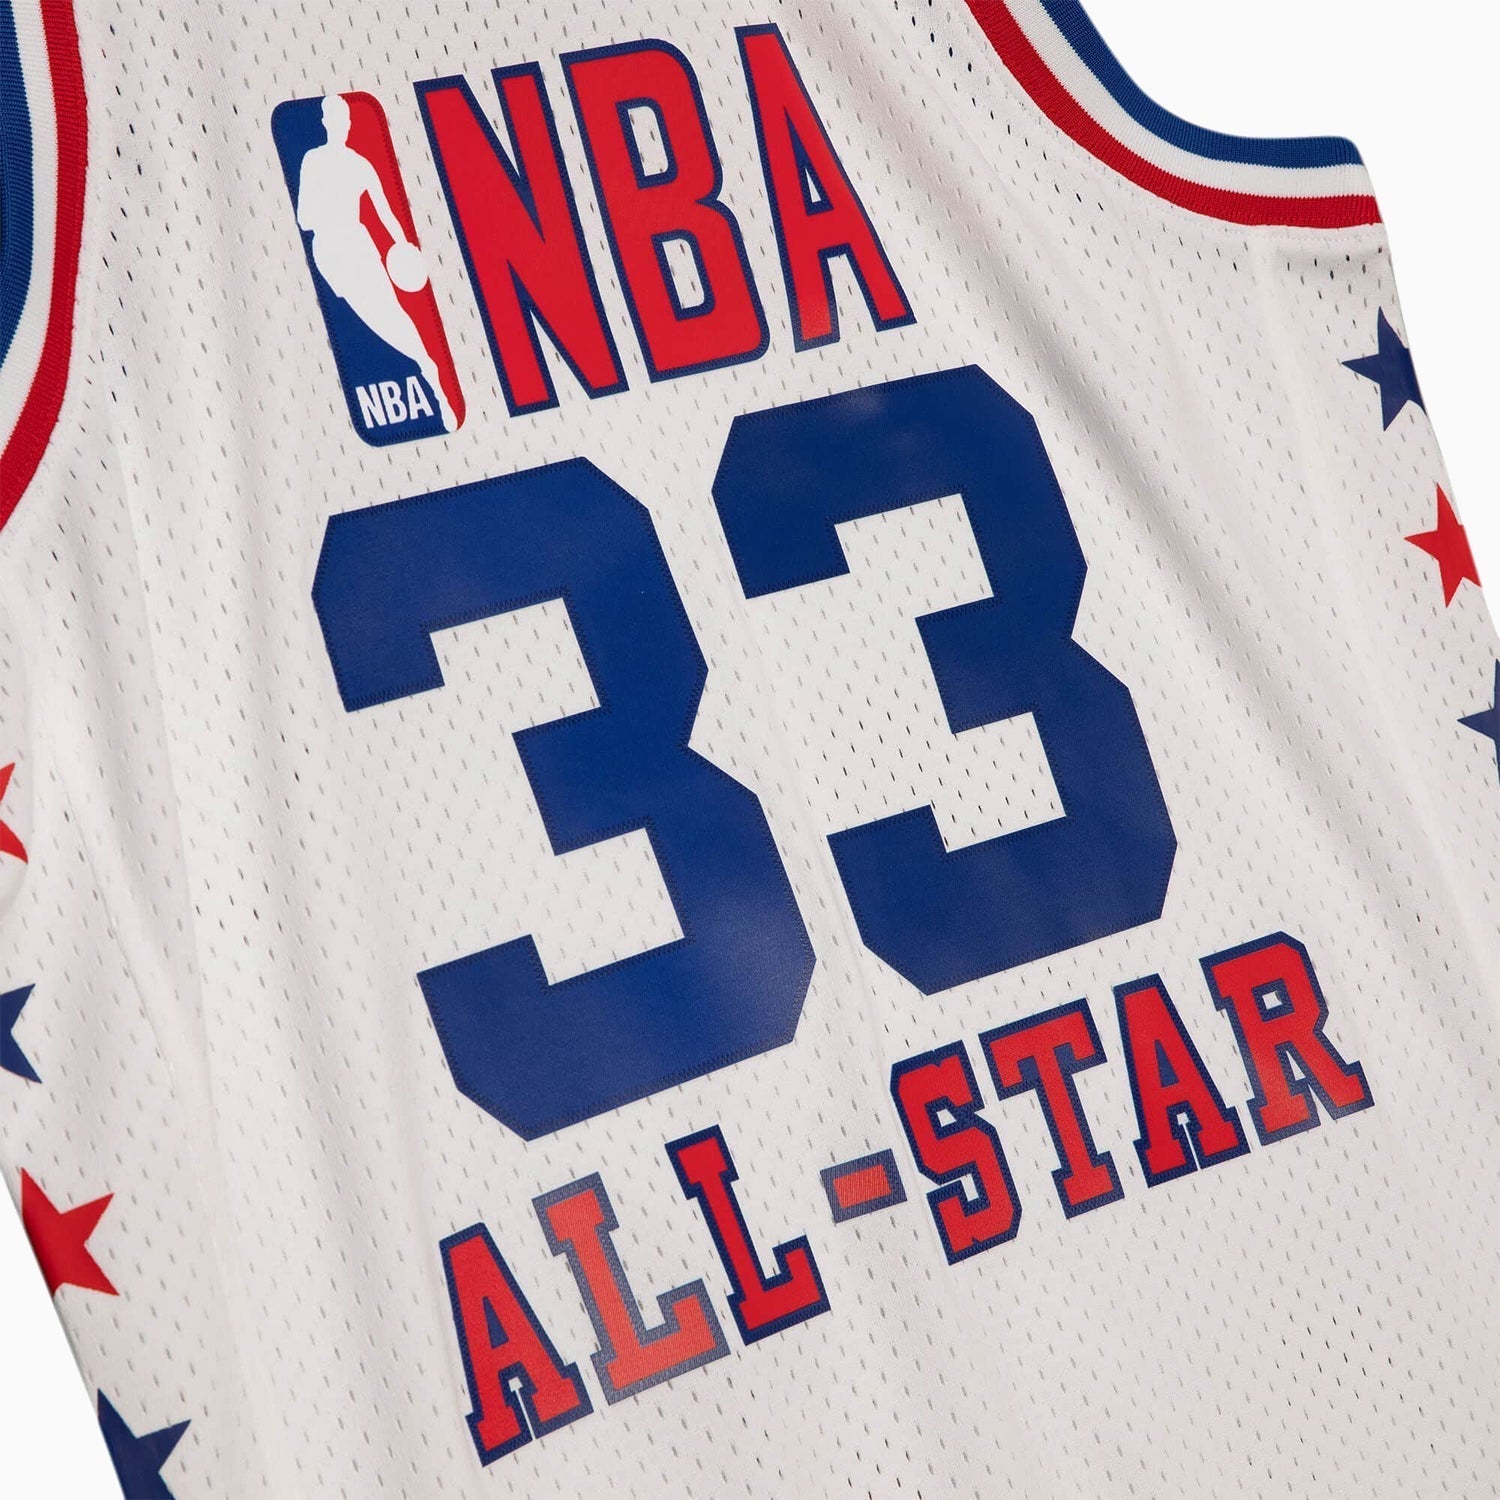 mitchell-and-ness-swingman-larry-bird-all-star-east-nba-1985-jersey-smjylg20012-asewhit85lbi